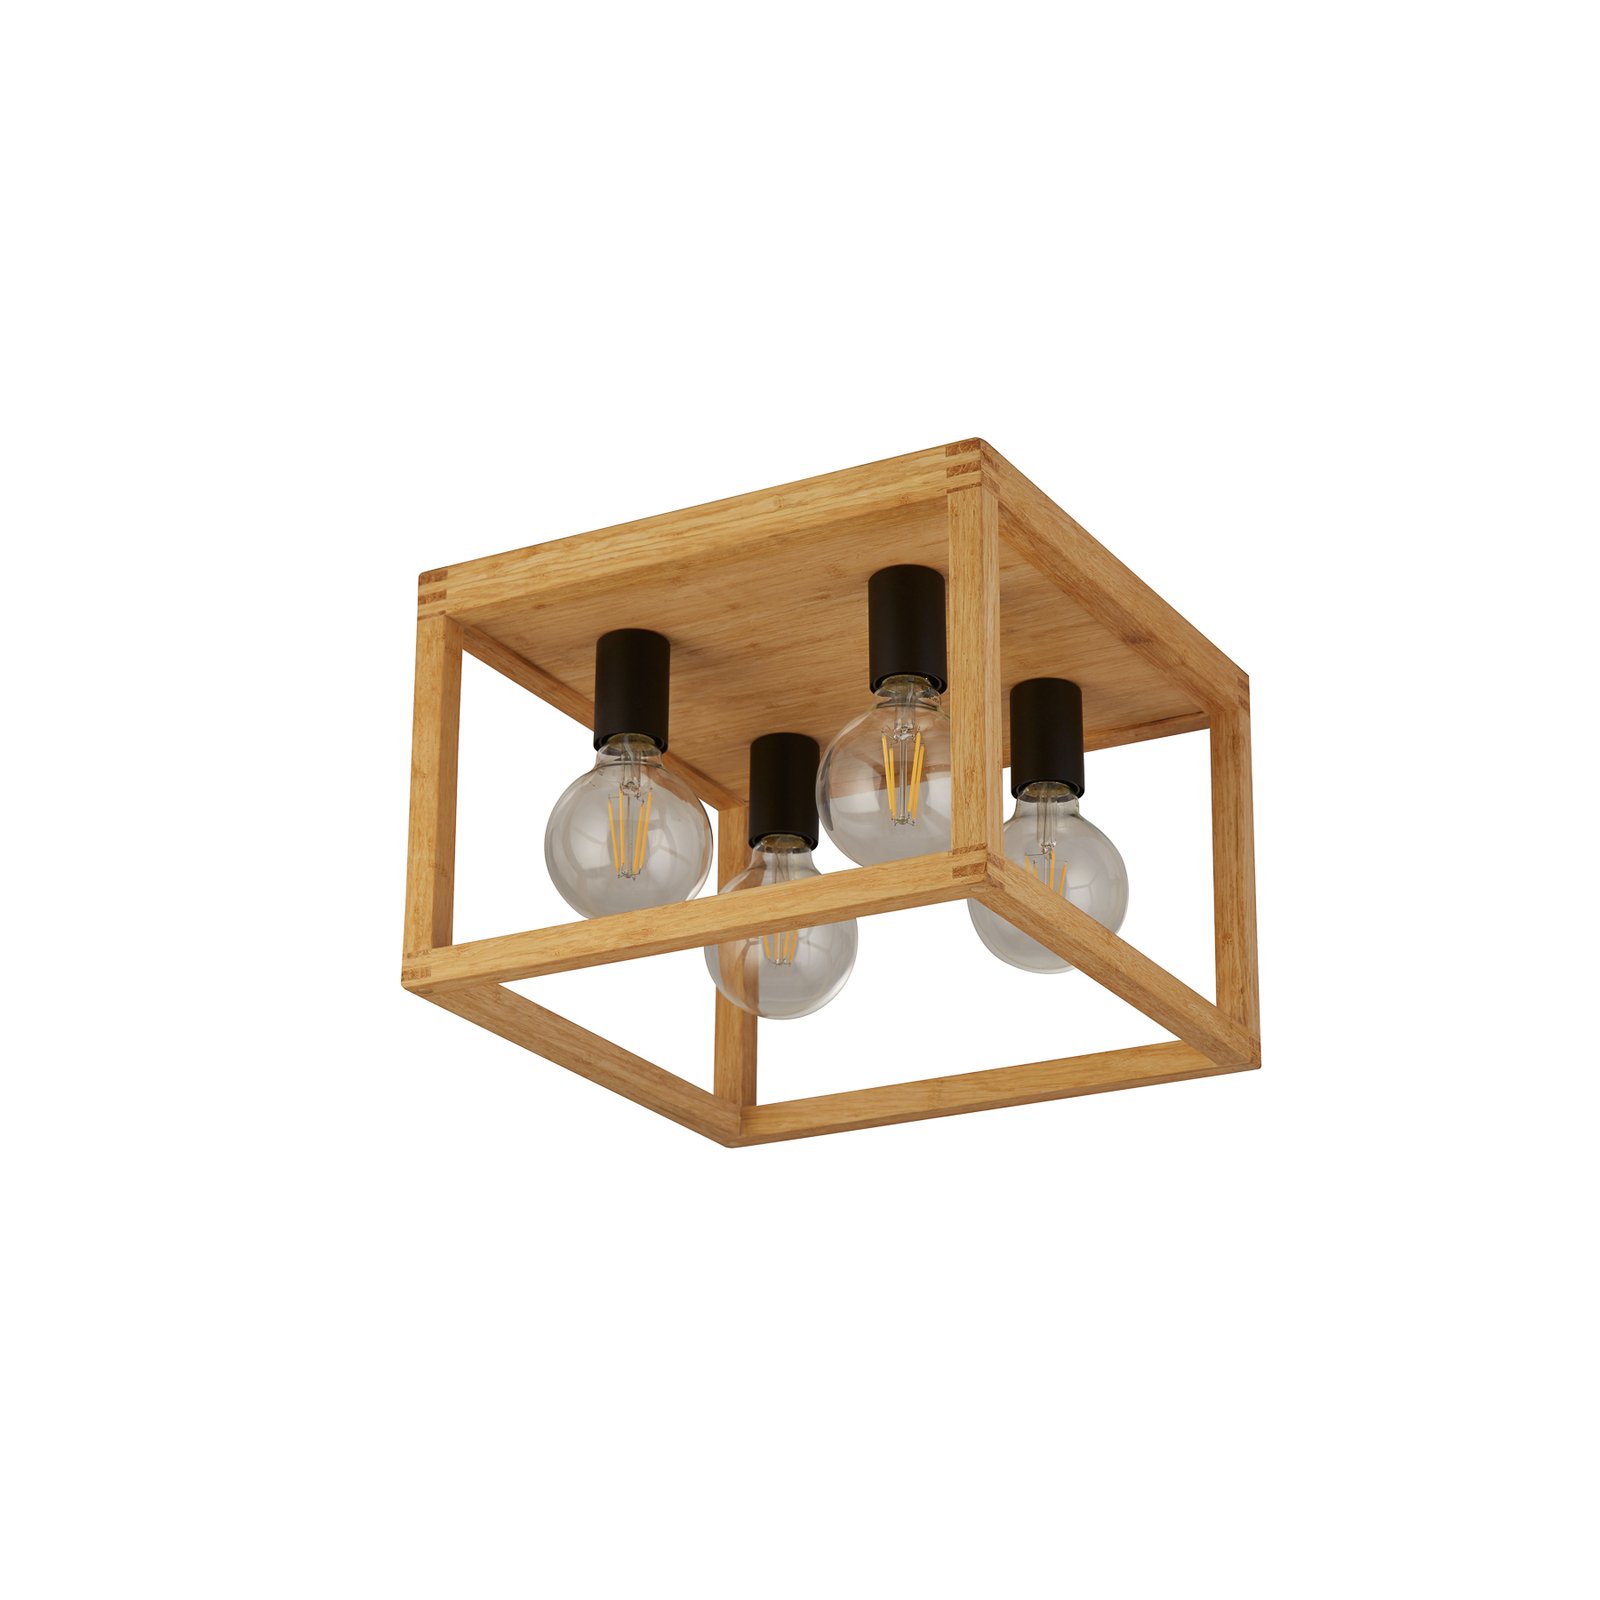 Square ceiling light made of bamboo, 4-bulb